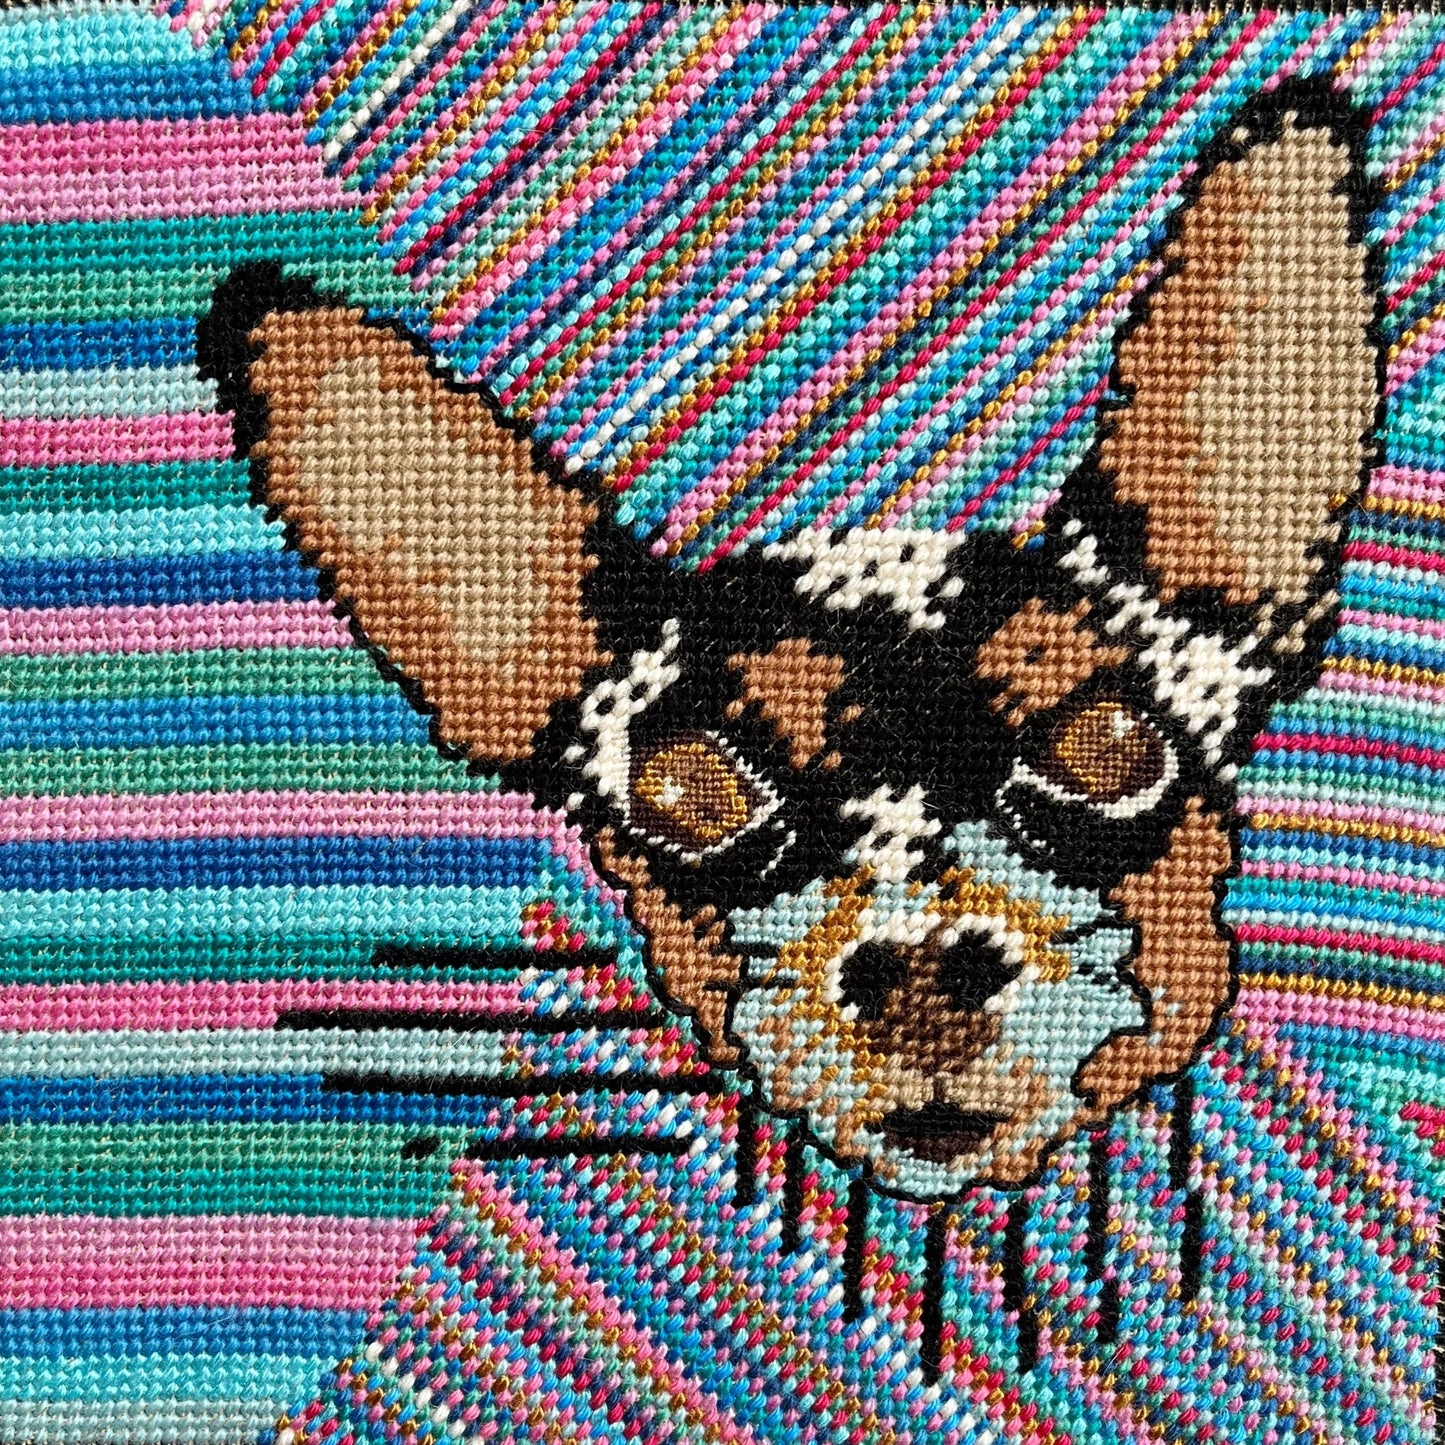 big-eared brown dog with baby blue accents, colorful abstract background